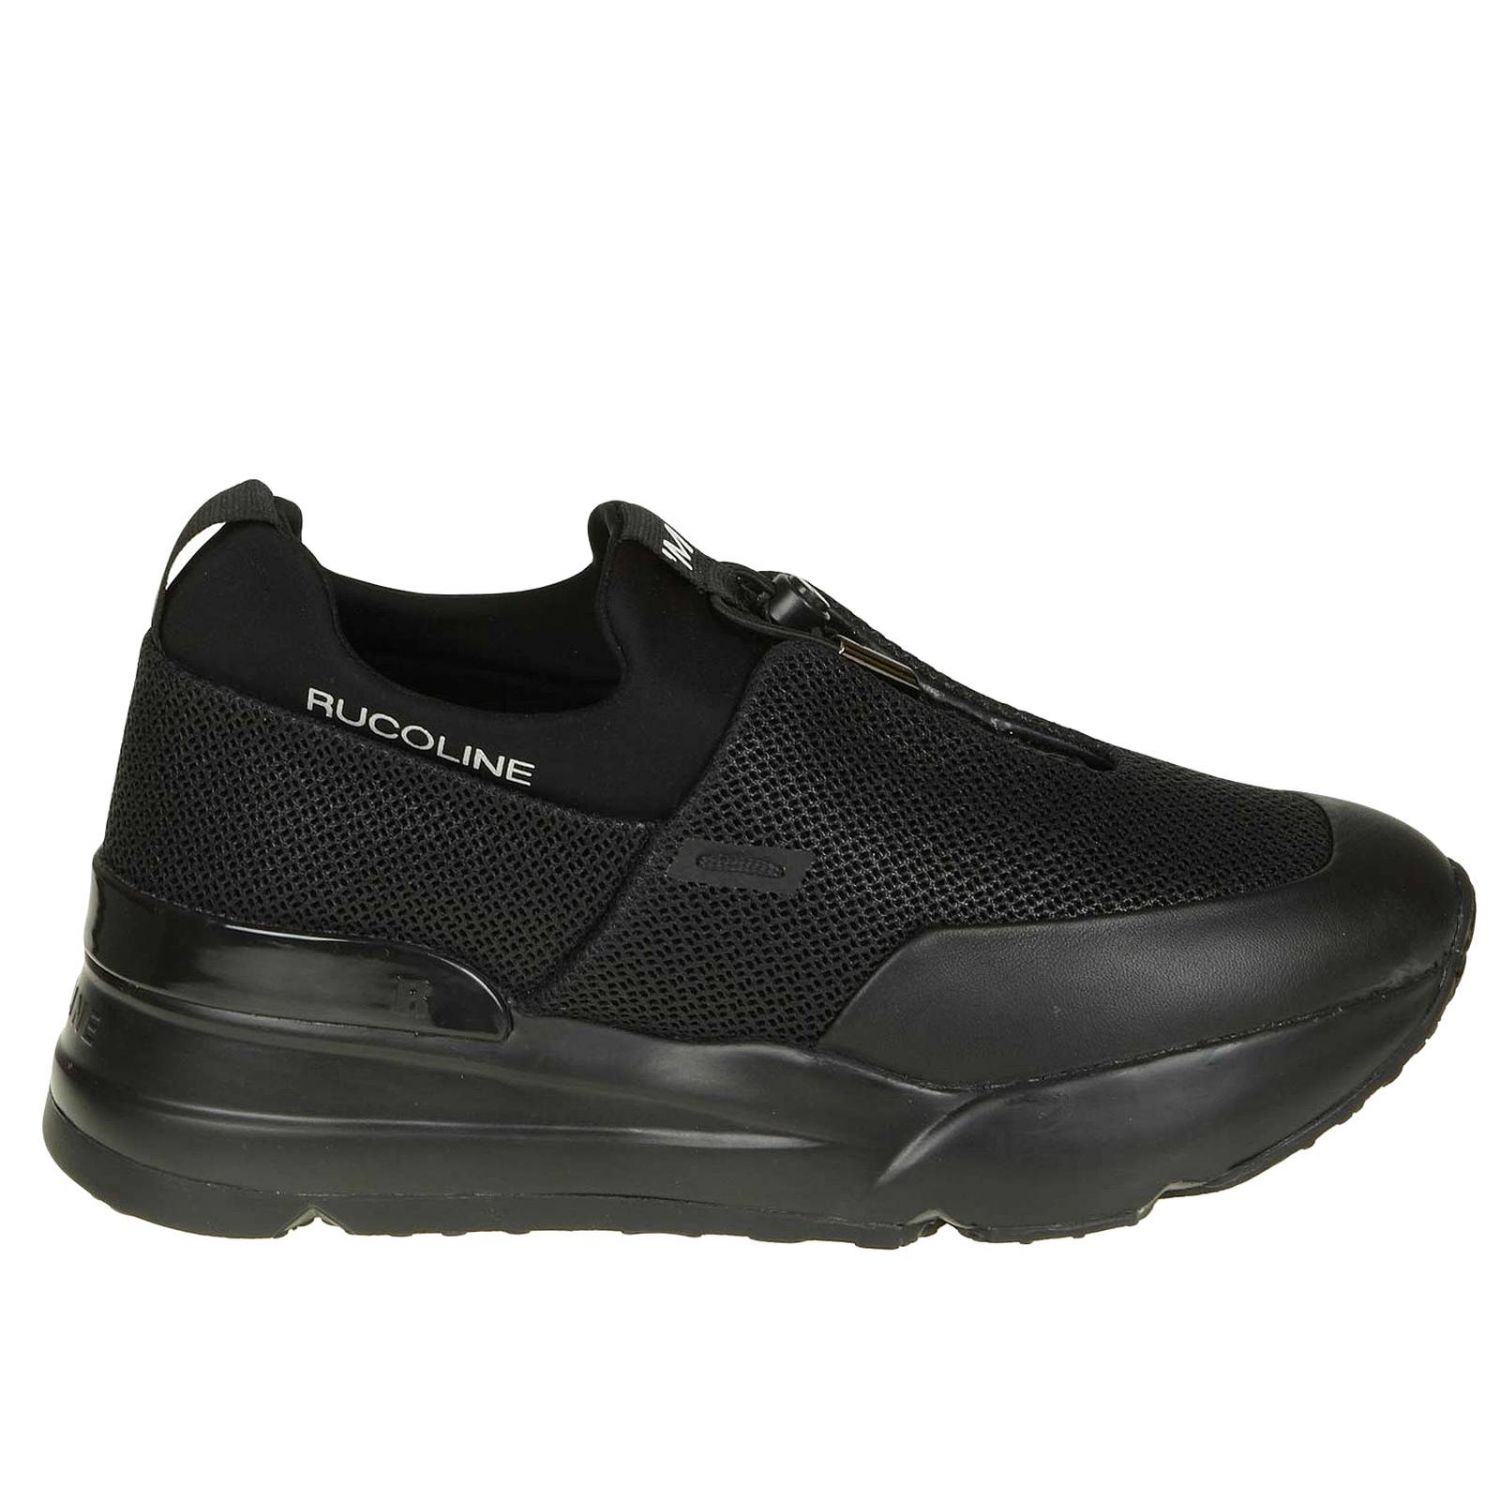 Rucoline Outlet: Sneakers women - Black | Sneakers Rucoline 122 GIGLIO.COM